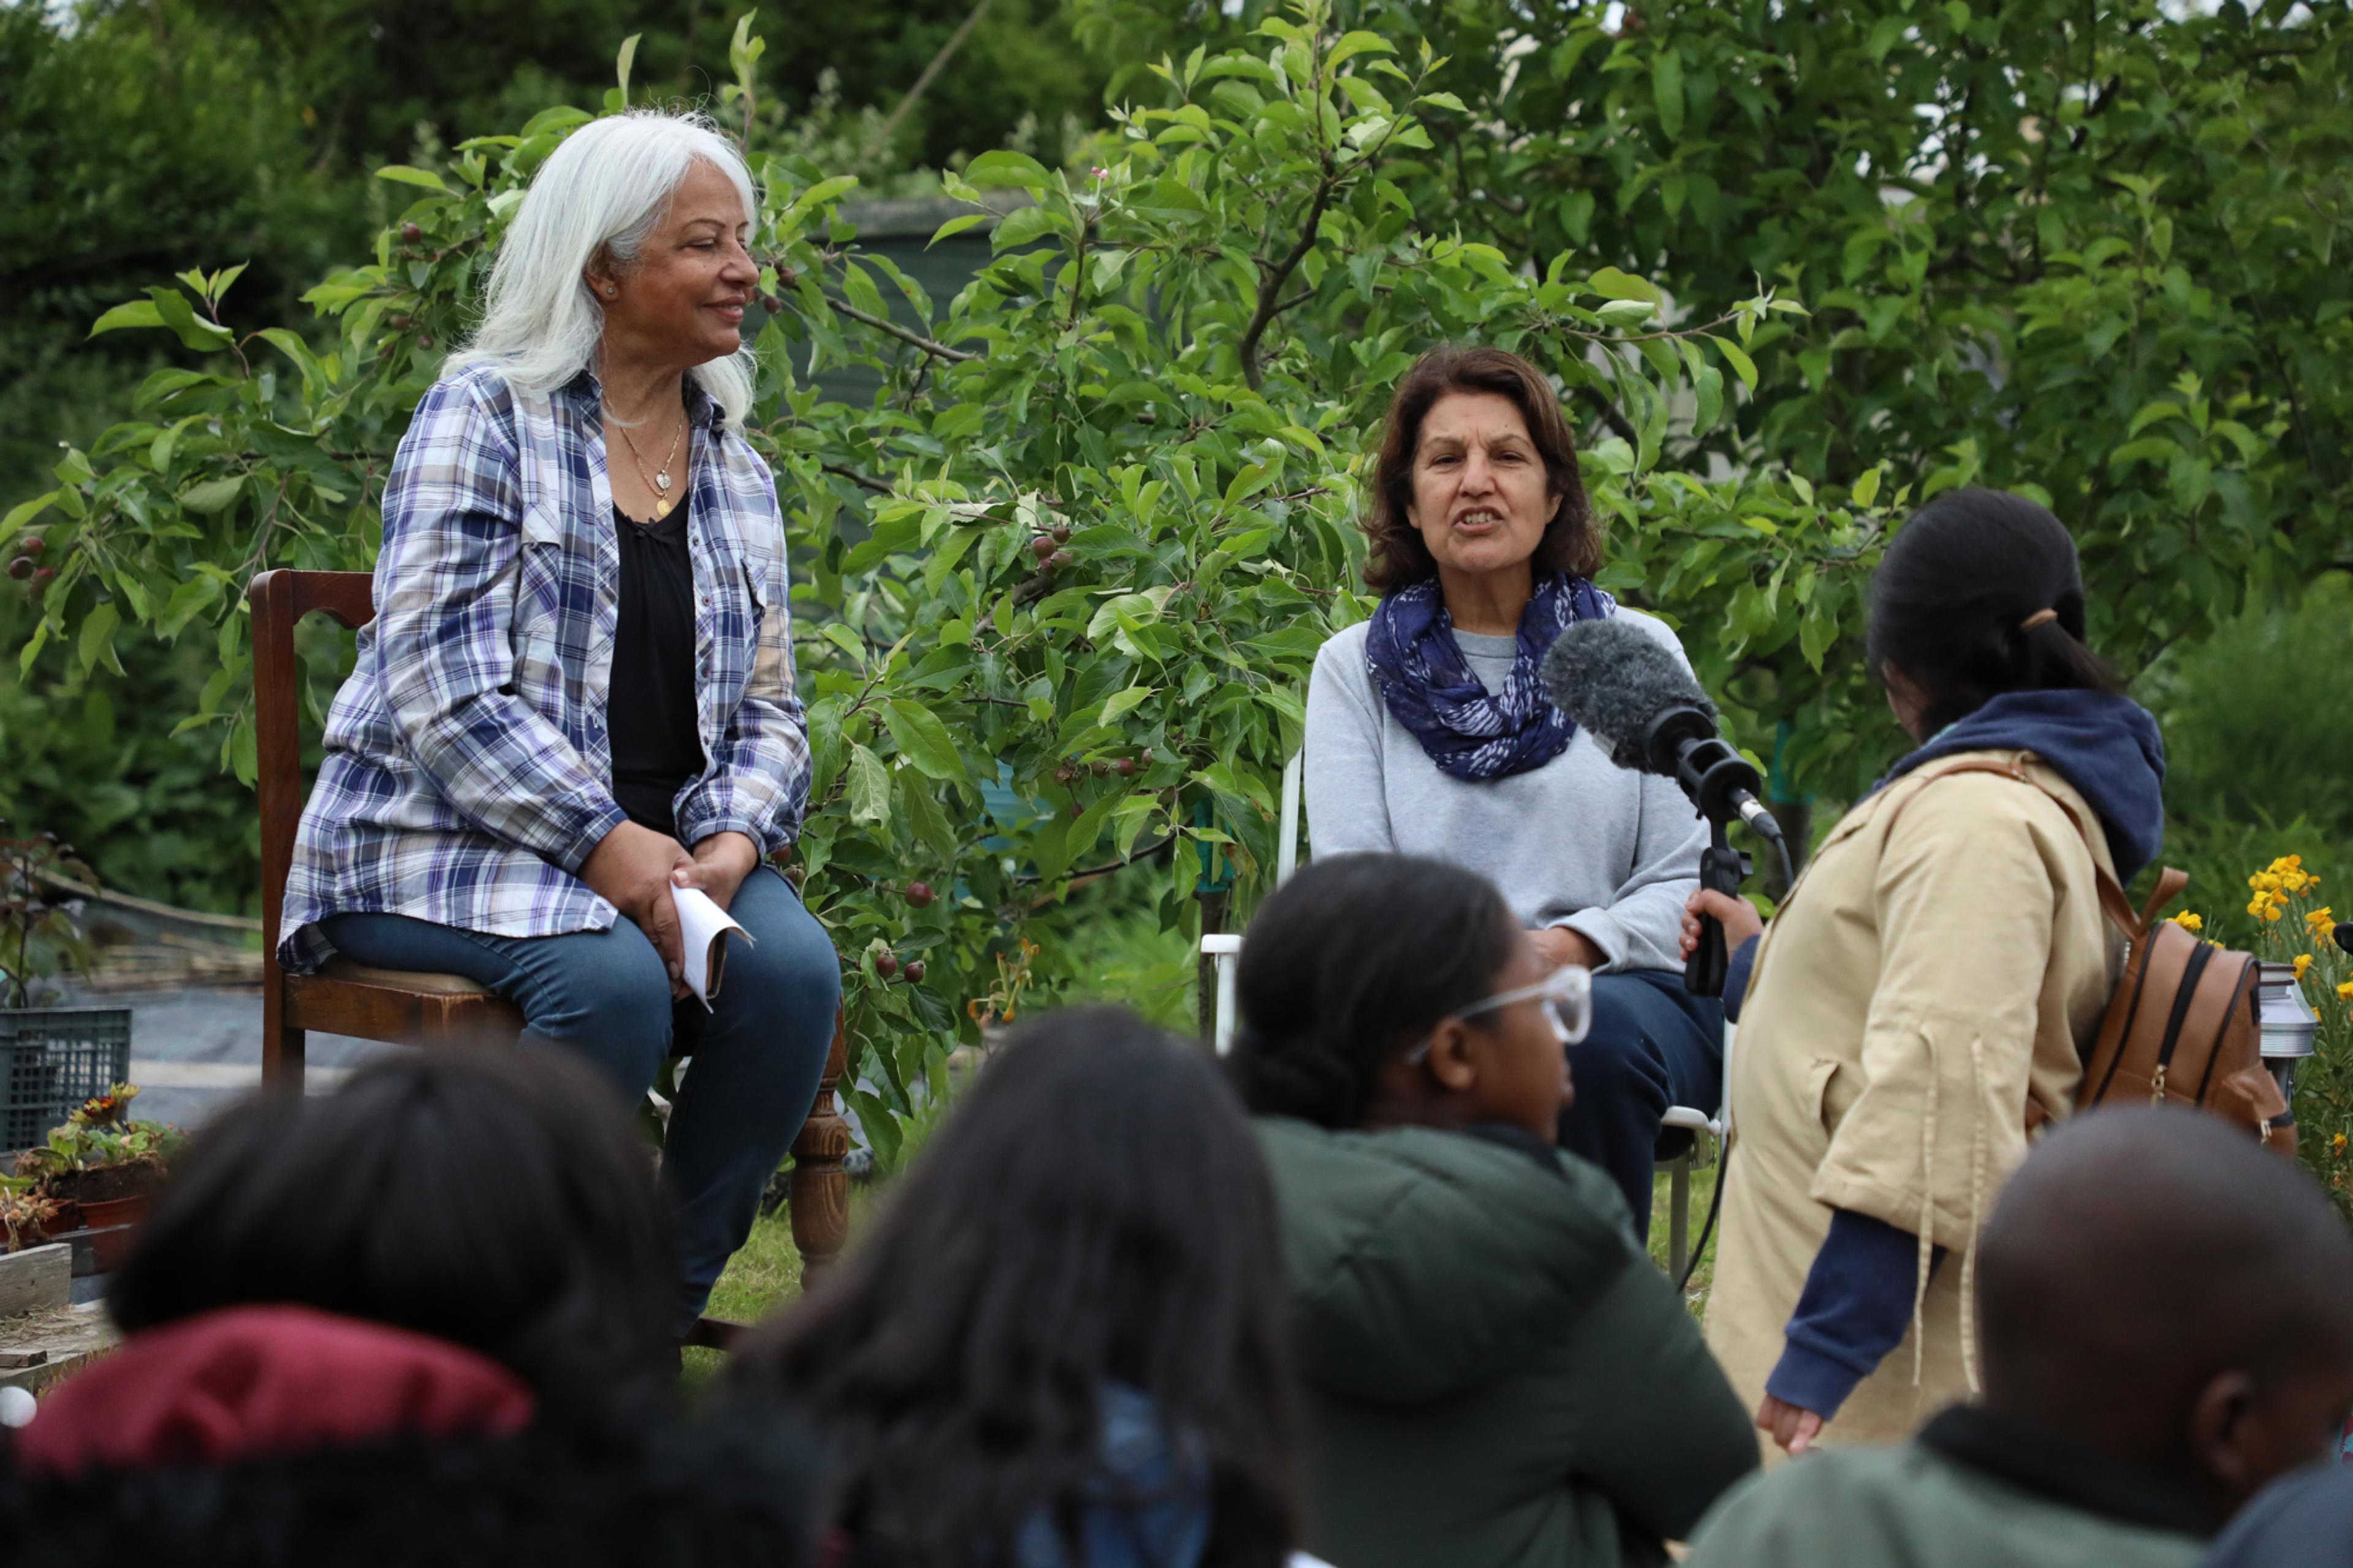 Two women site in chairs outdoors at an allotment, one speaking into a microphone held by a student